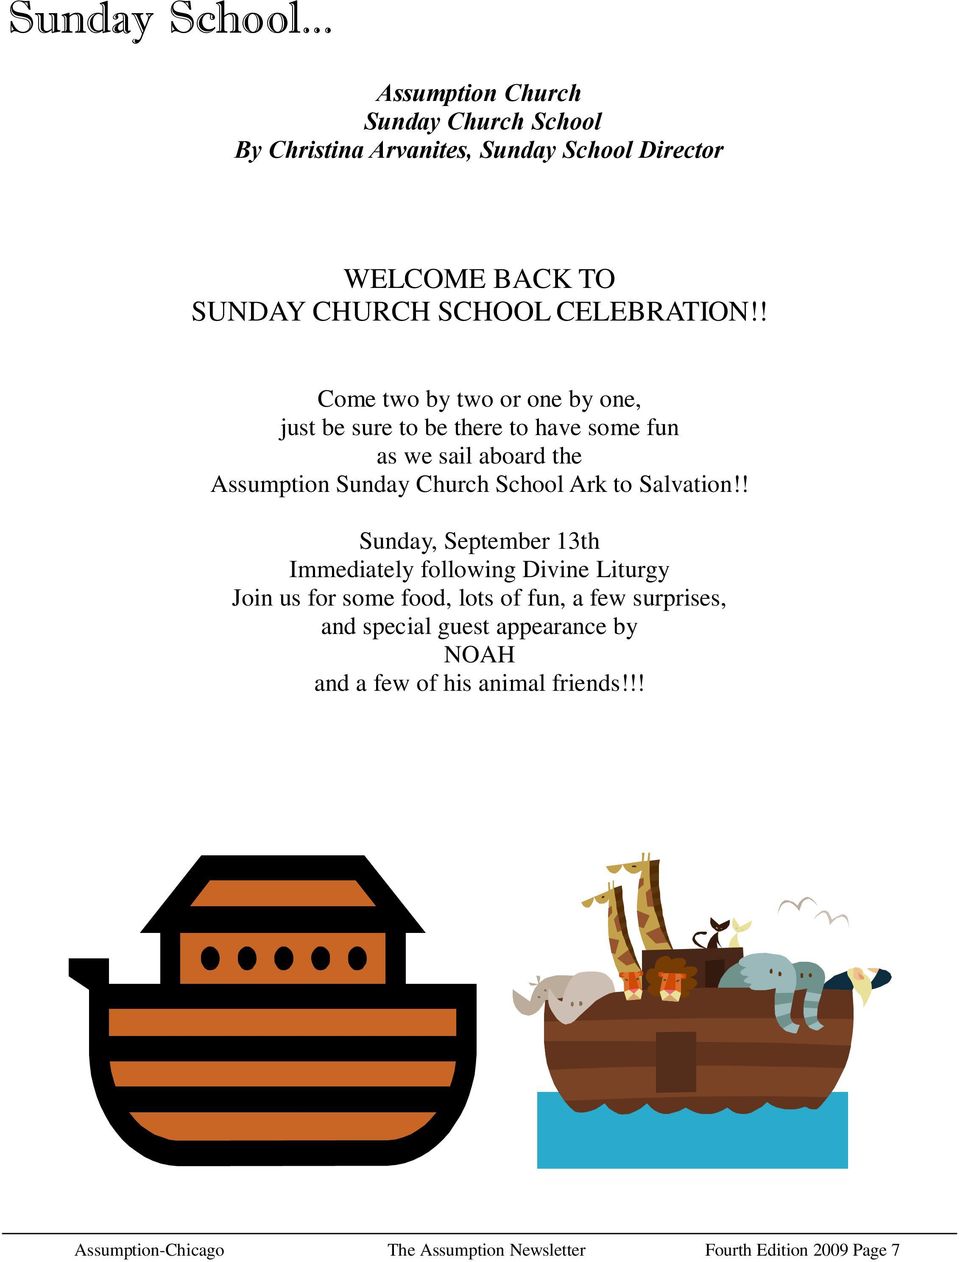 ! Come two by two or one by one, just be sure to be there to have some fun as we sail aboard the Assumption Sunday Church School Ark to